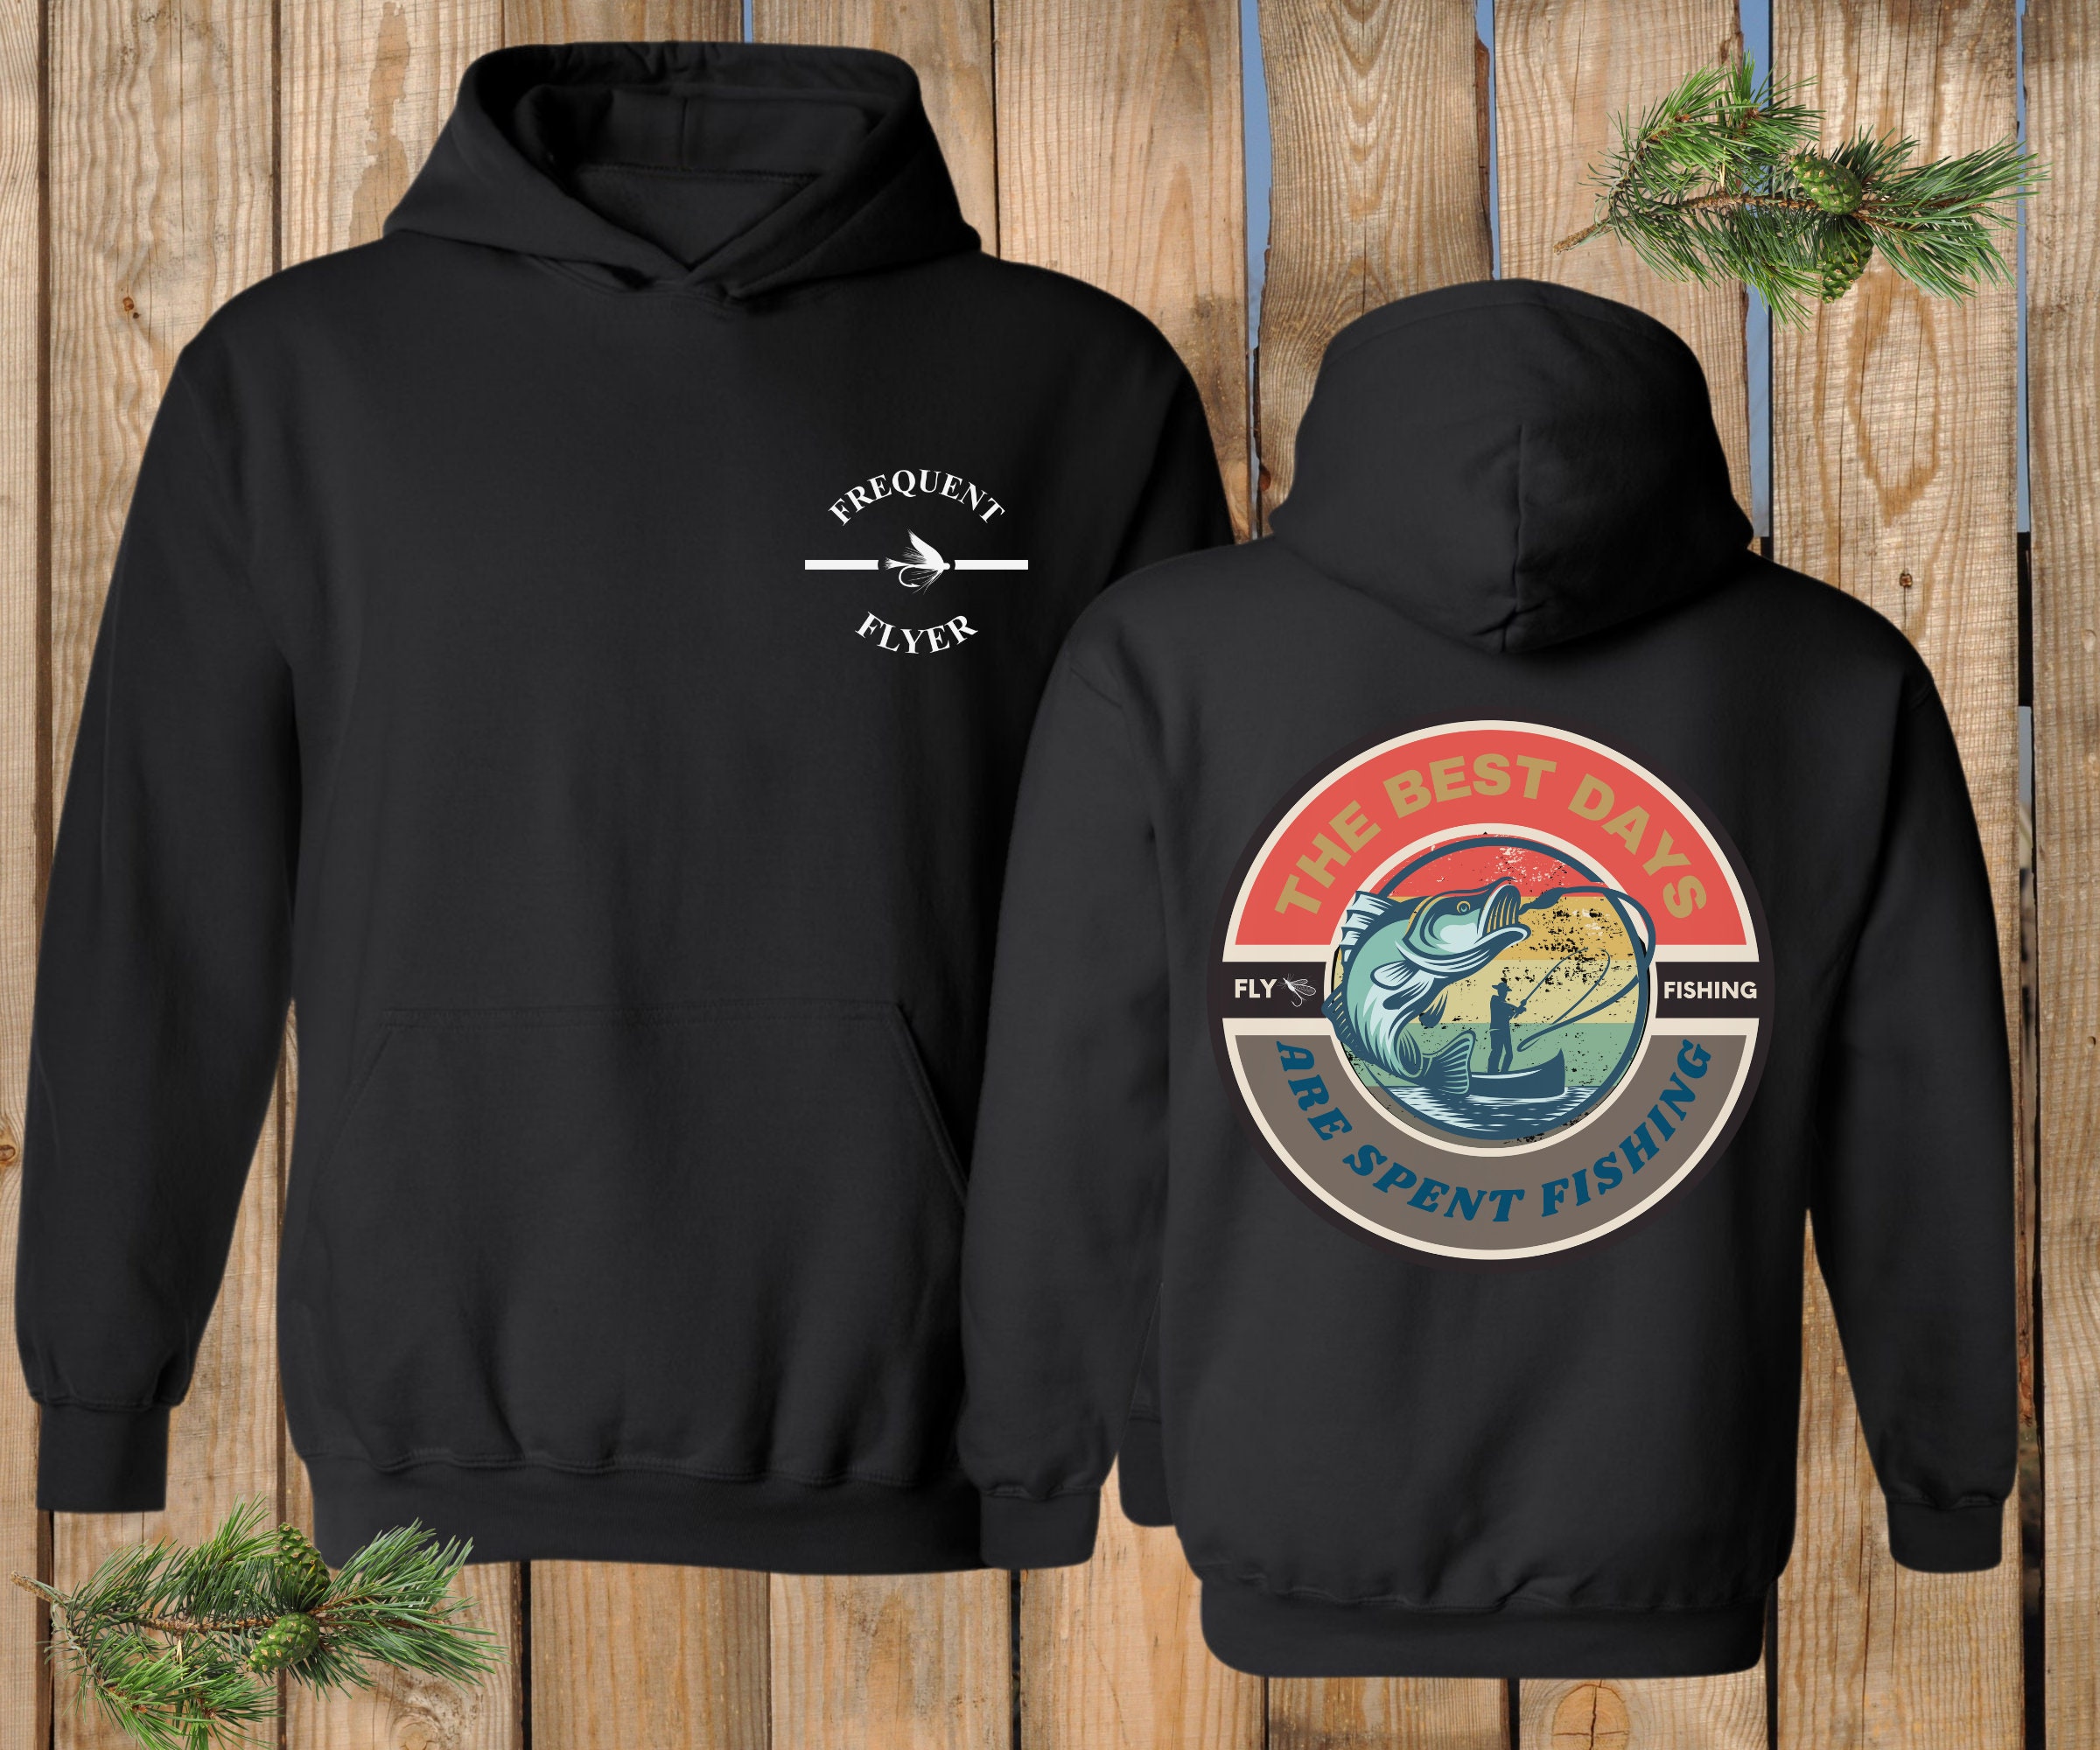 Fly Fishing Hoodie, Super Fly, Outdoors Wear, Fishing Apparel